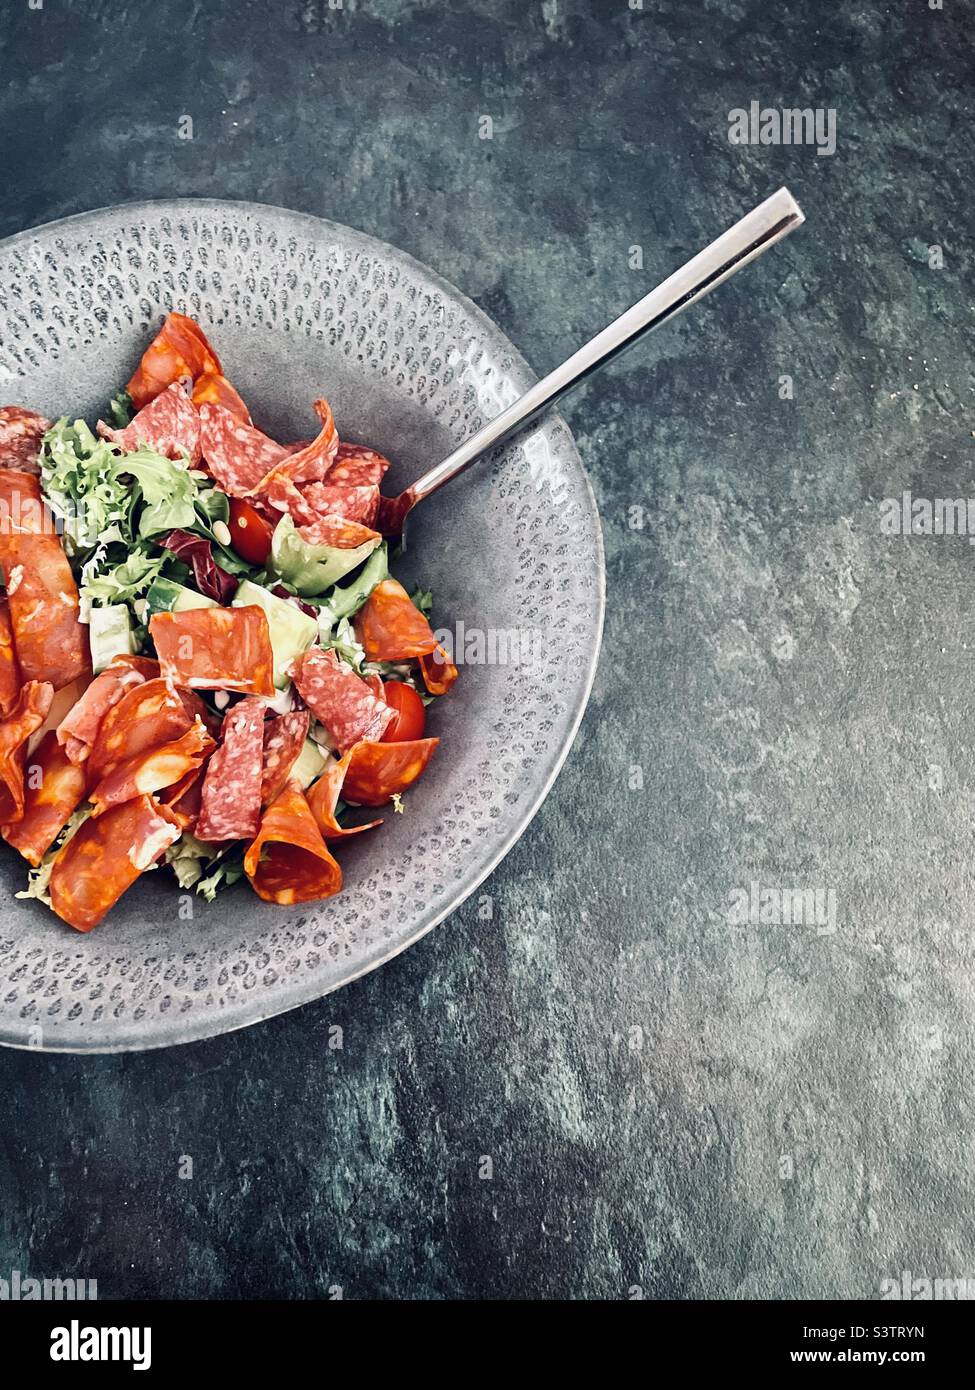 Continental meat salad. Stock Photo